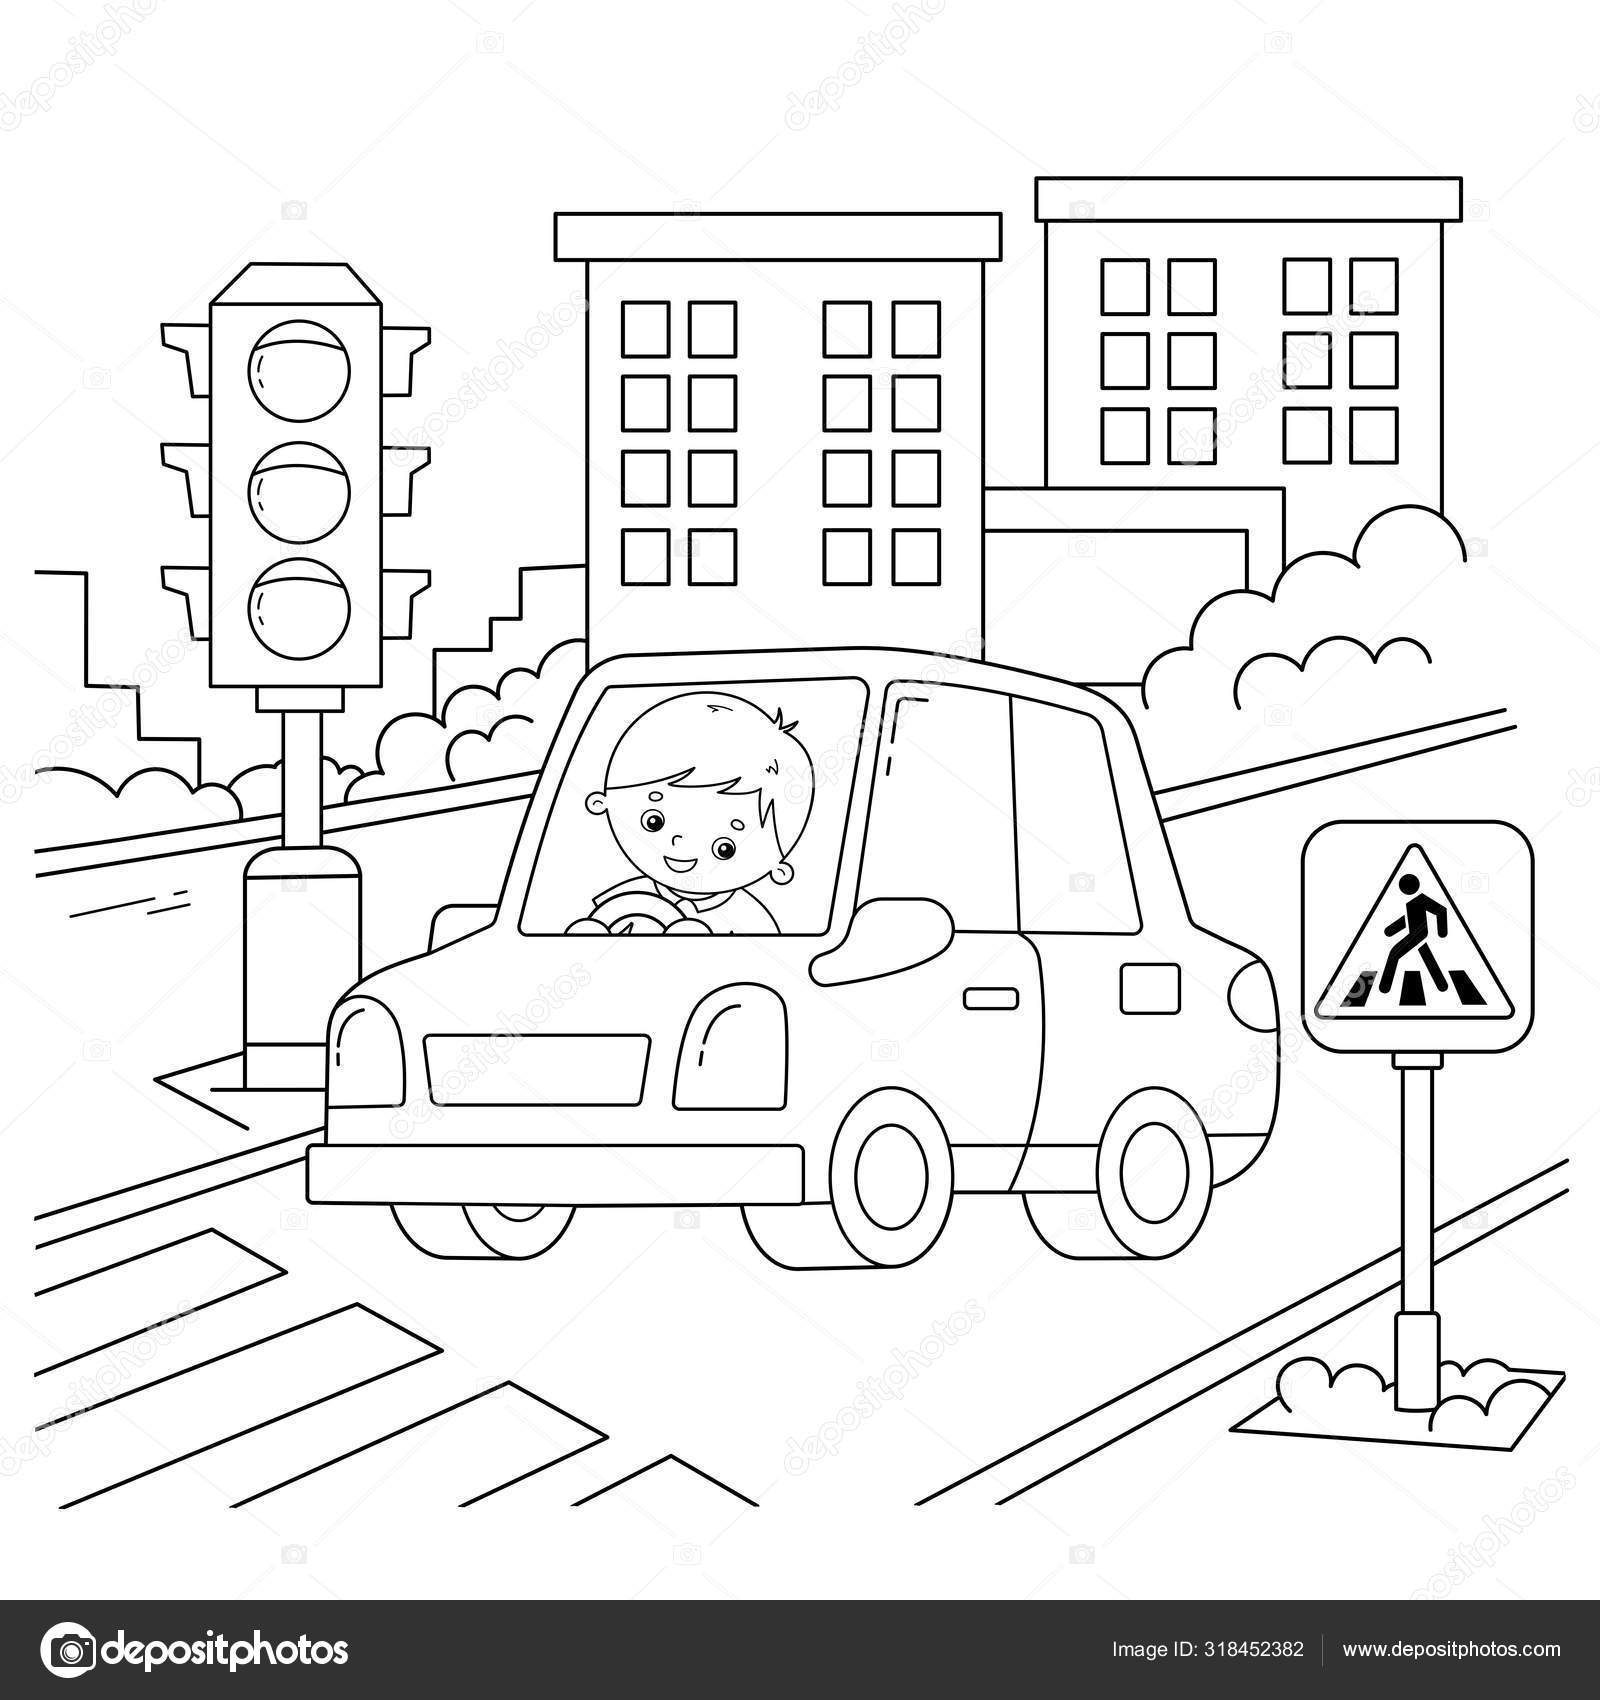 Coloring Page Outline Of cartoon car with driver on road. Traffic light